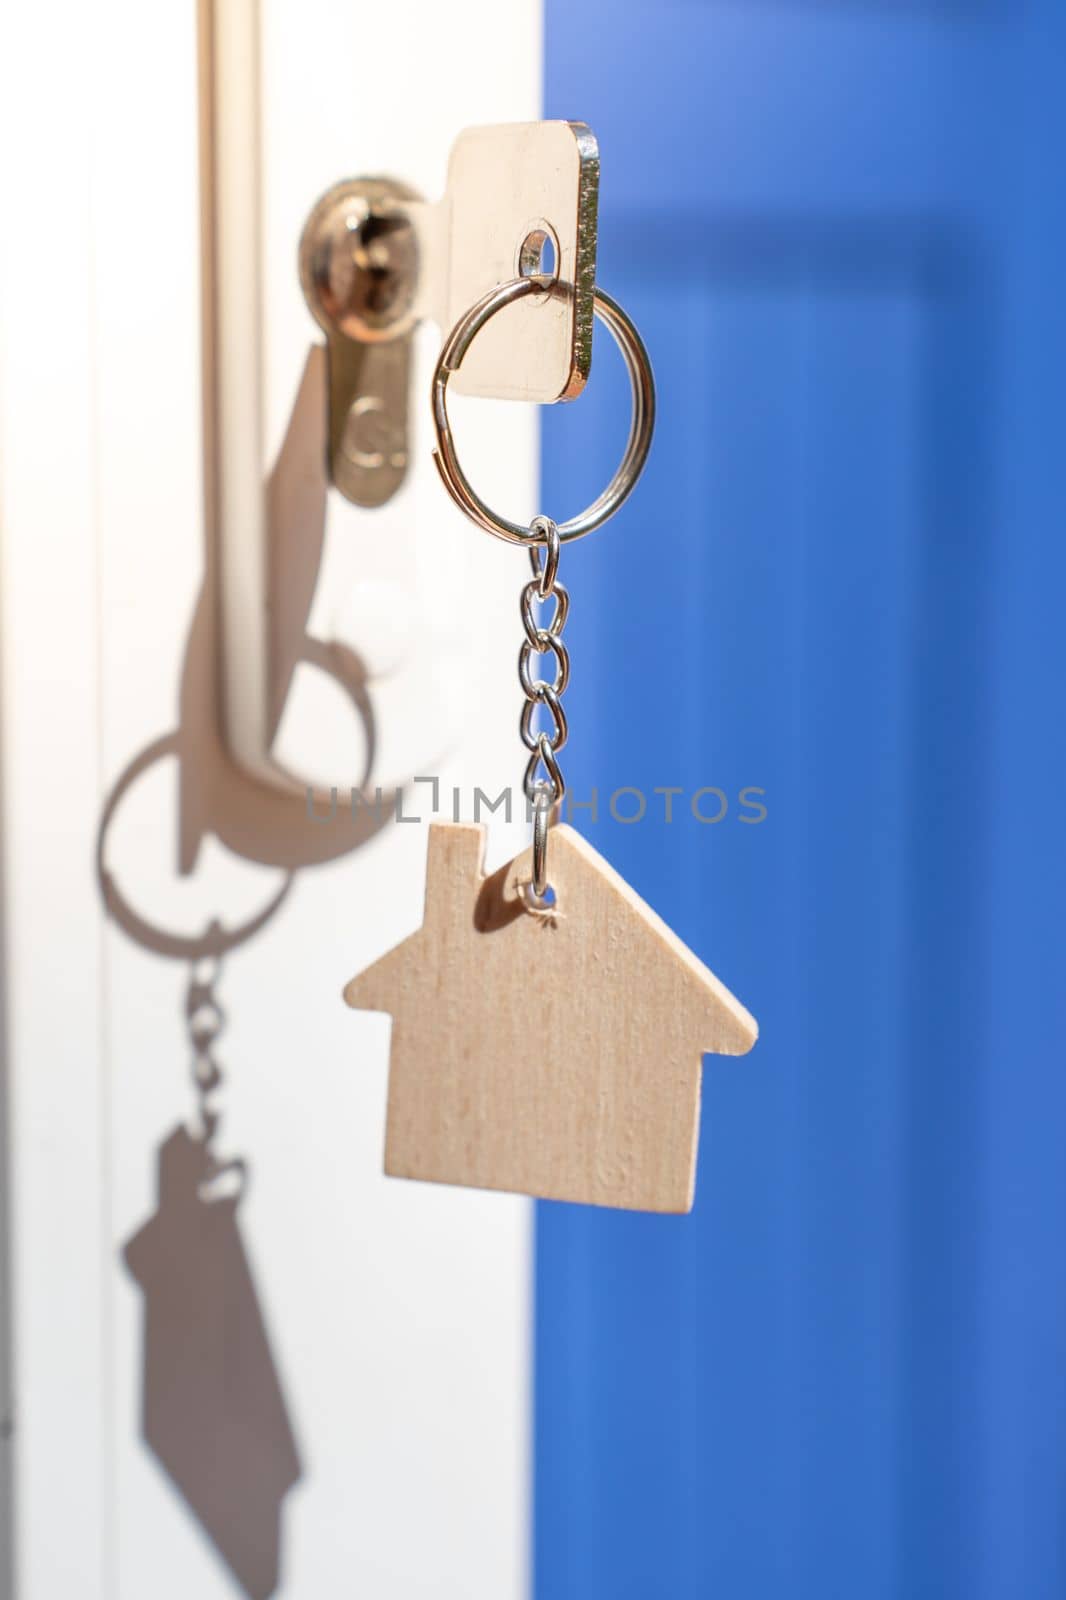 Opening door to a new home with key and home shaped keychain - Mortgage, investment, real estate, property and new home concept. High quality photo